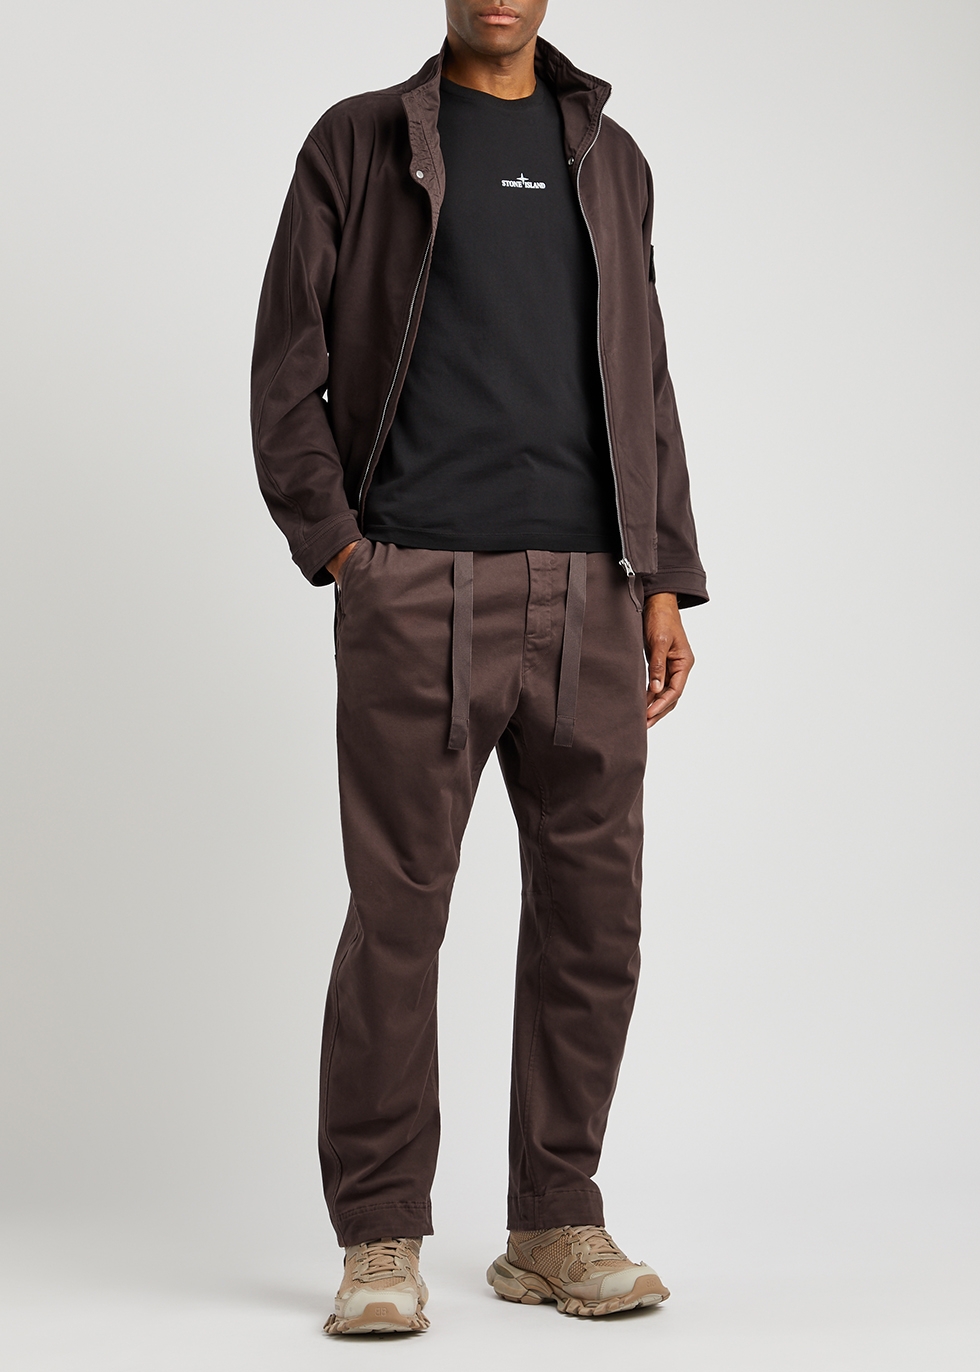 STONE ISLAND SHADOW PROJECT】wide-leg cotton-blend chinos - www